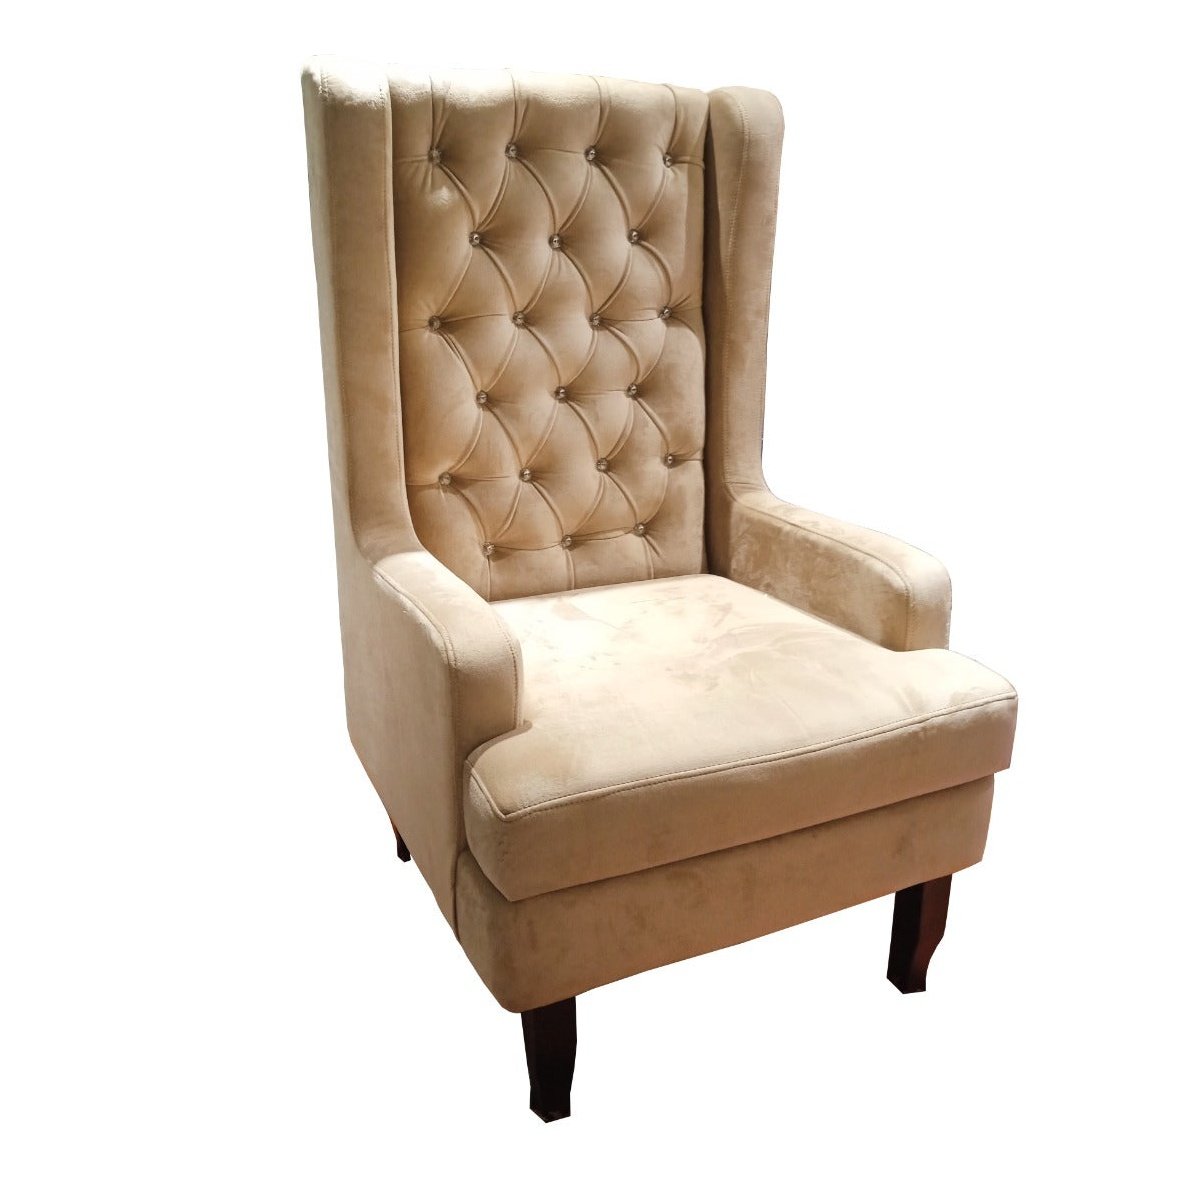 MS-MARRIOT;HIGH BACK CHAIR MoBEL Furniture